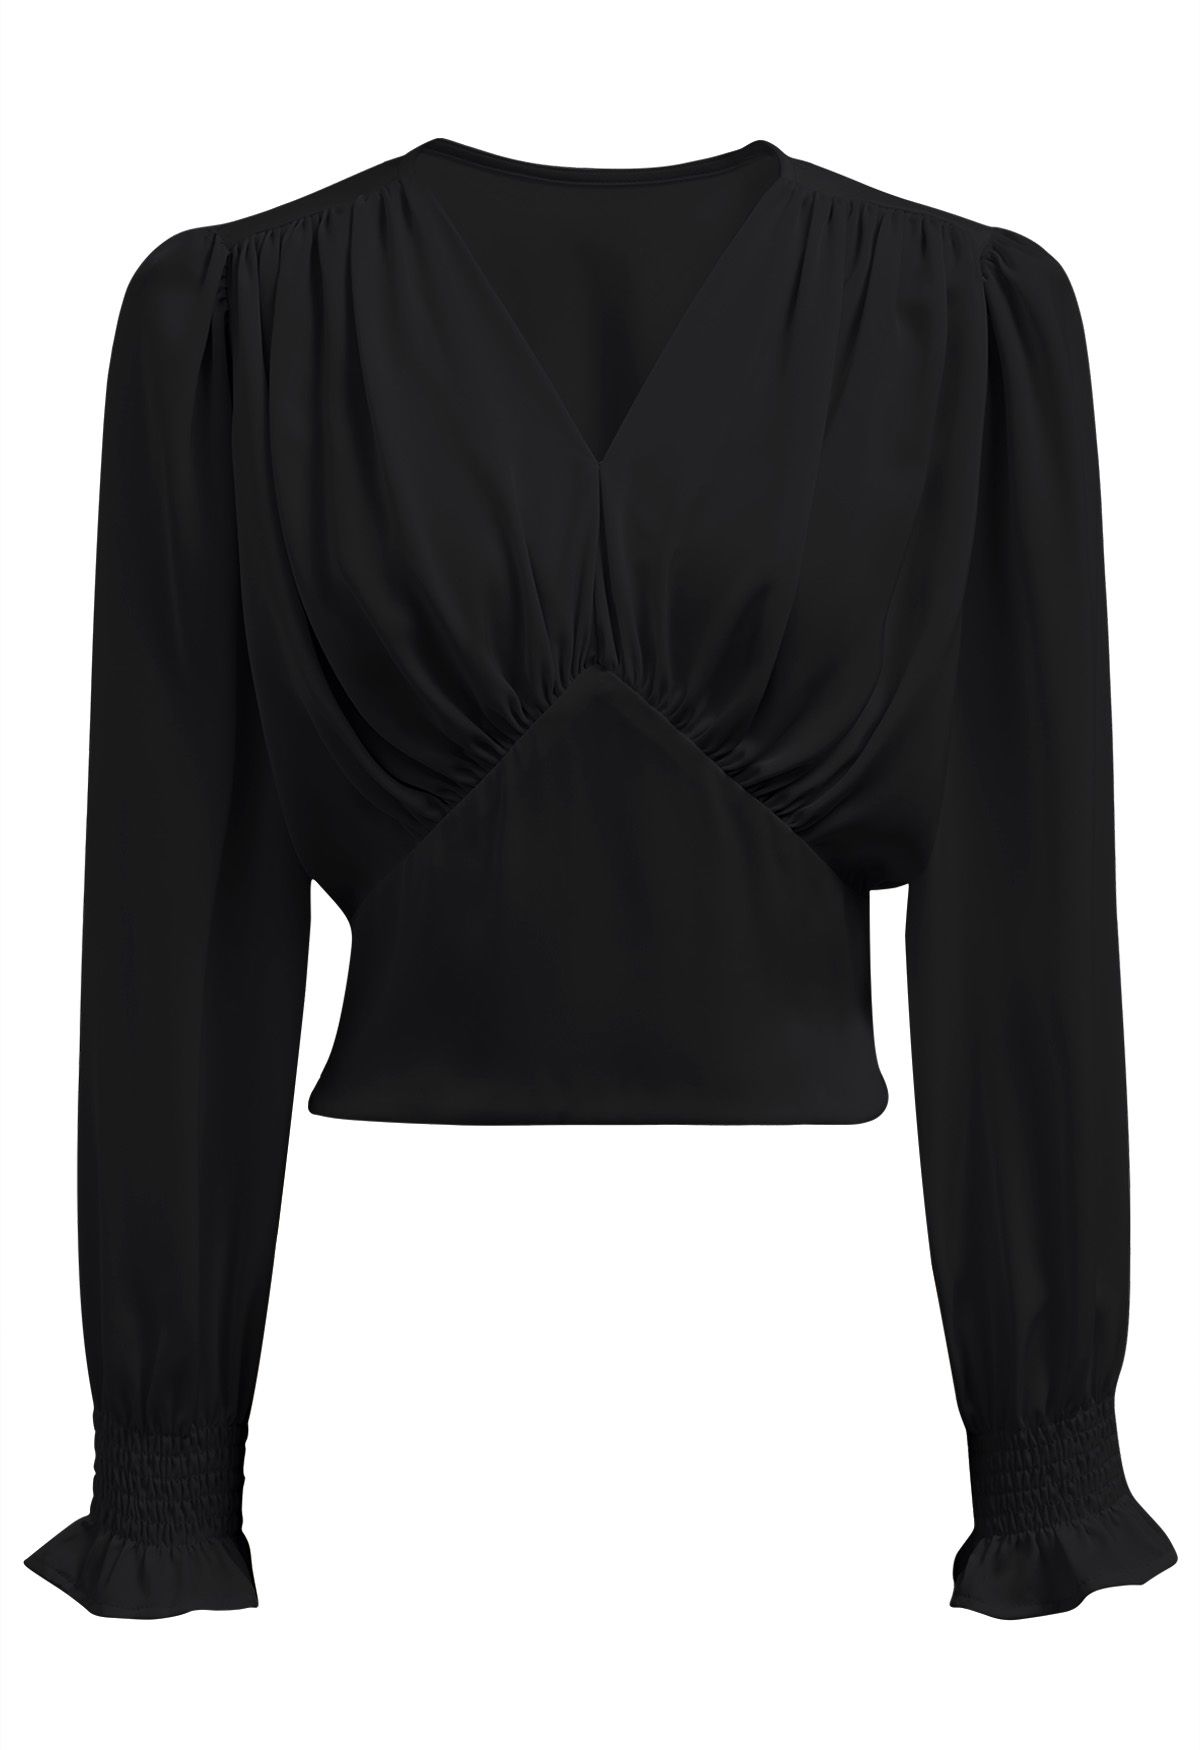 Satin Finish V-Neck Puff Sleeves Crop Top in Black - Retro, Indie and ...